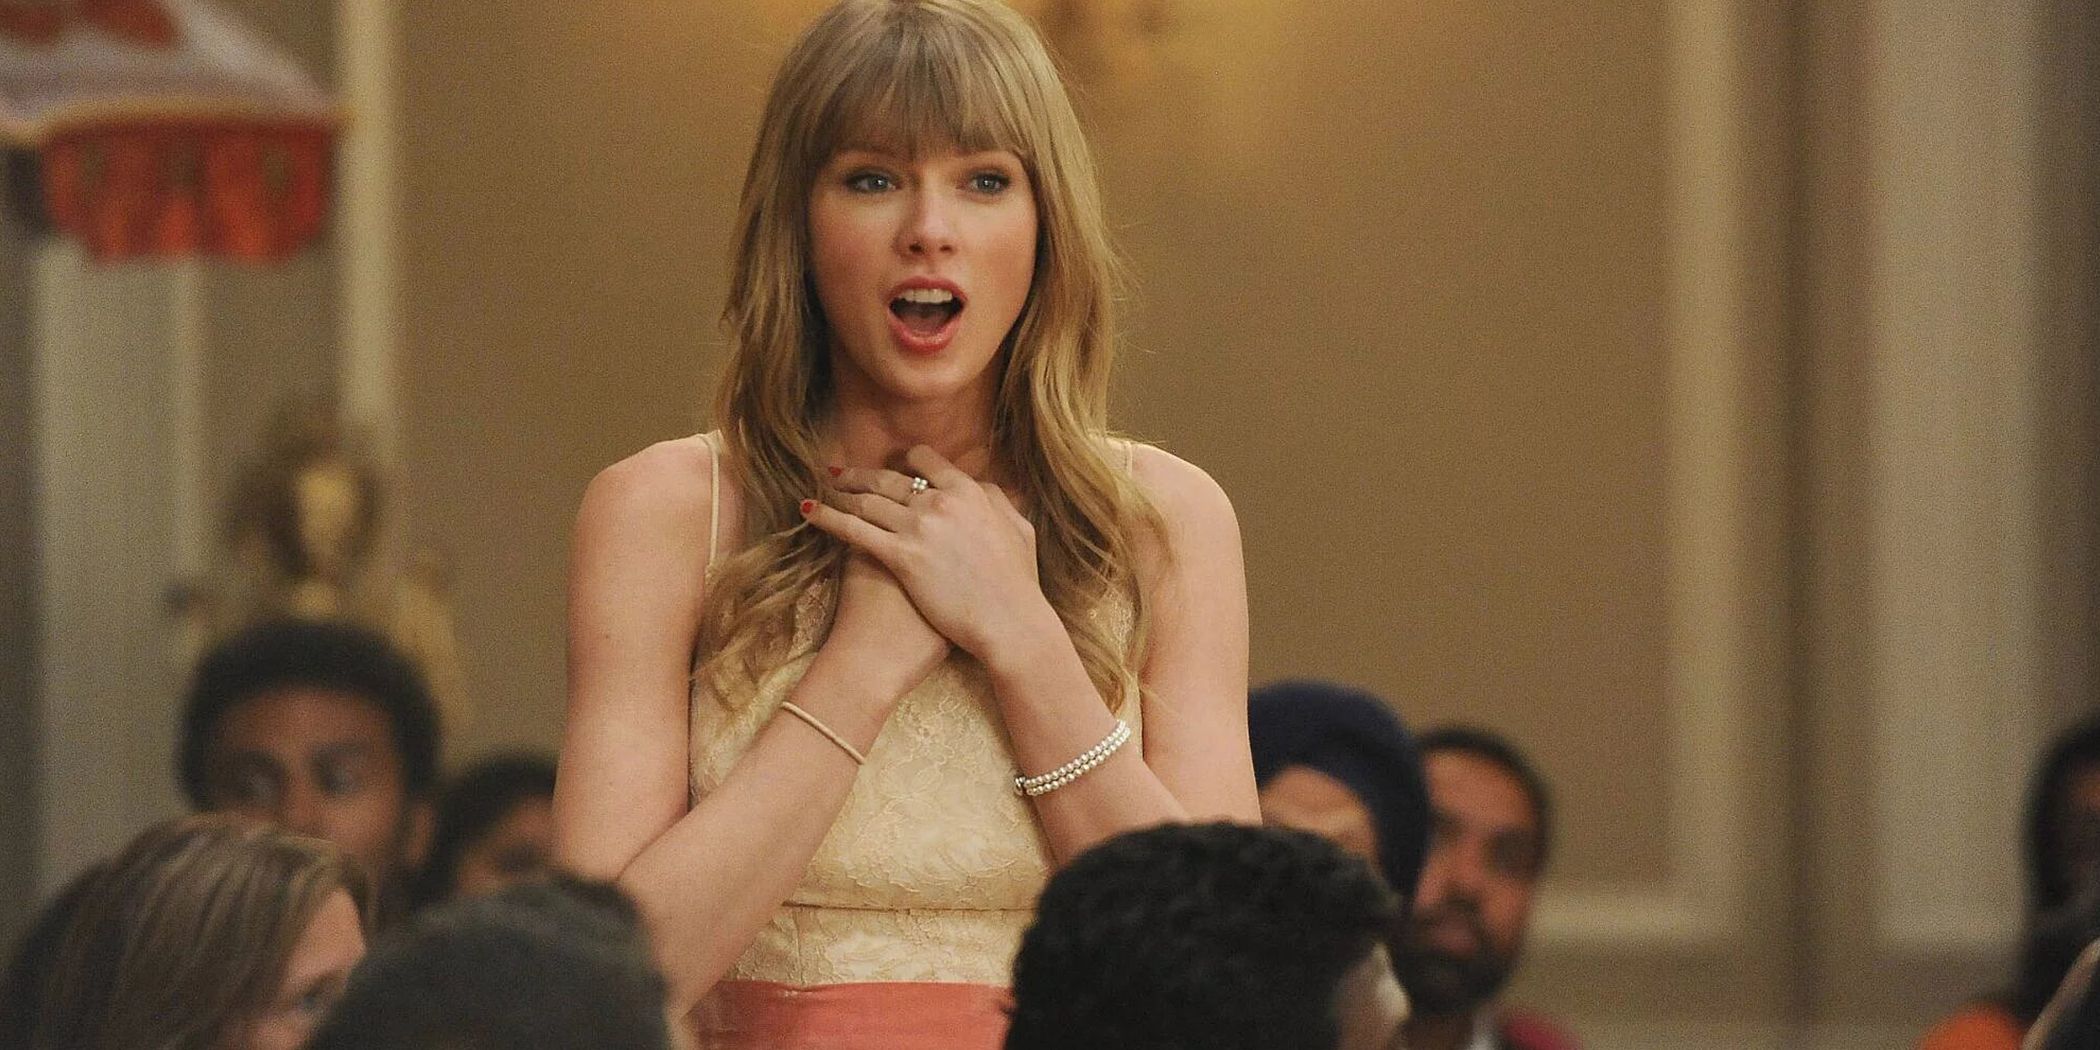 Taylor Swift as Elaine with her hands on her chest in New Girl